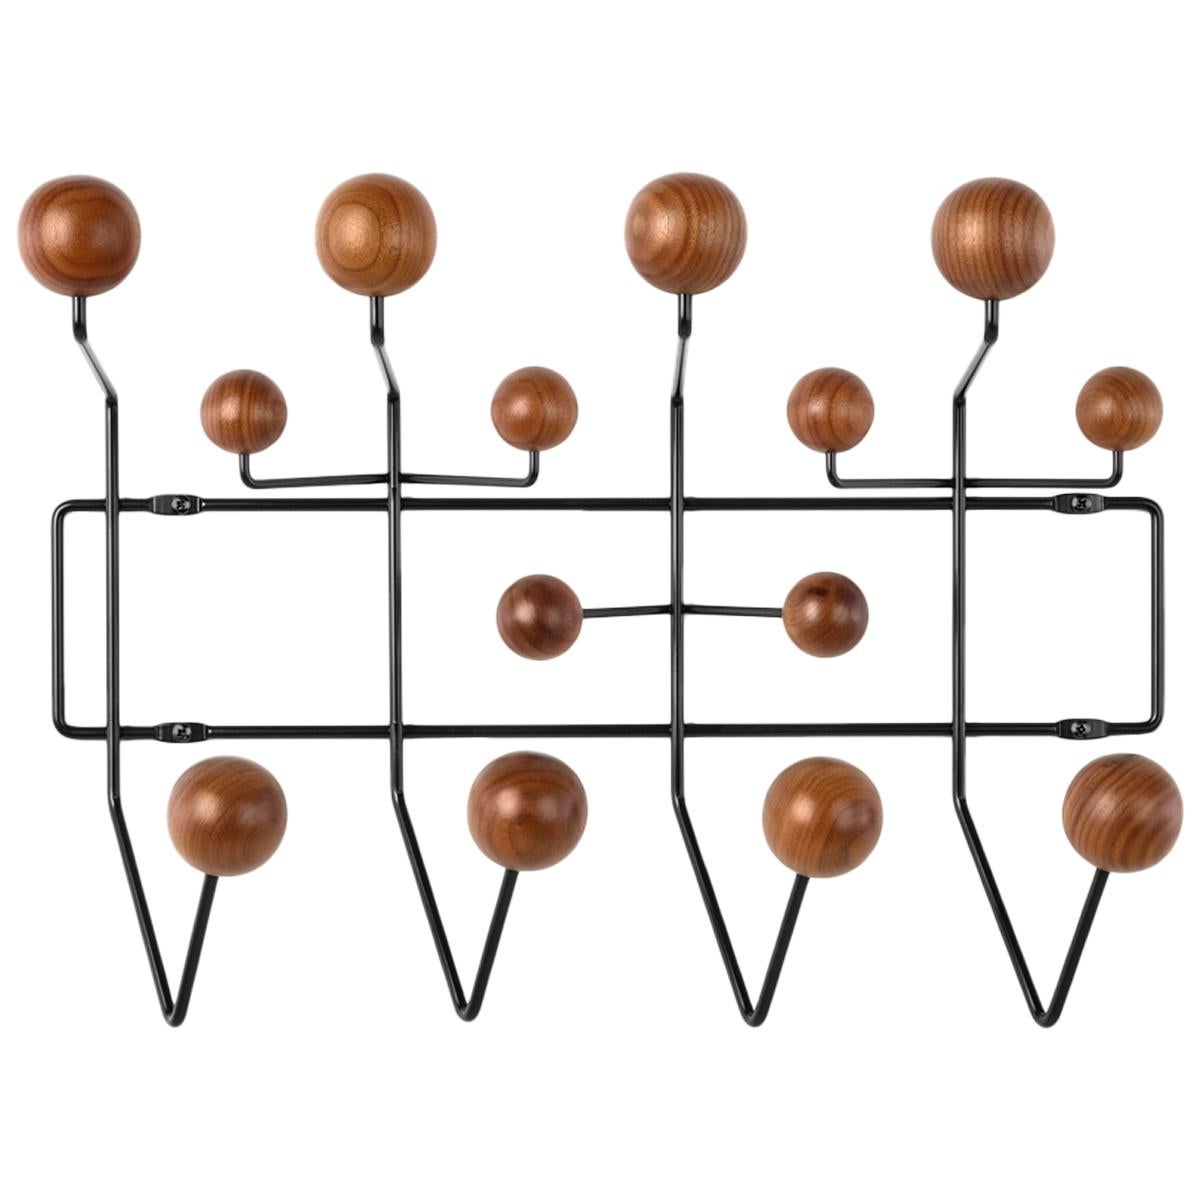 Eames Hang-It-All Designed by Charles and Ray Eames, produced by Herman Miller